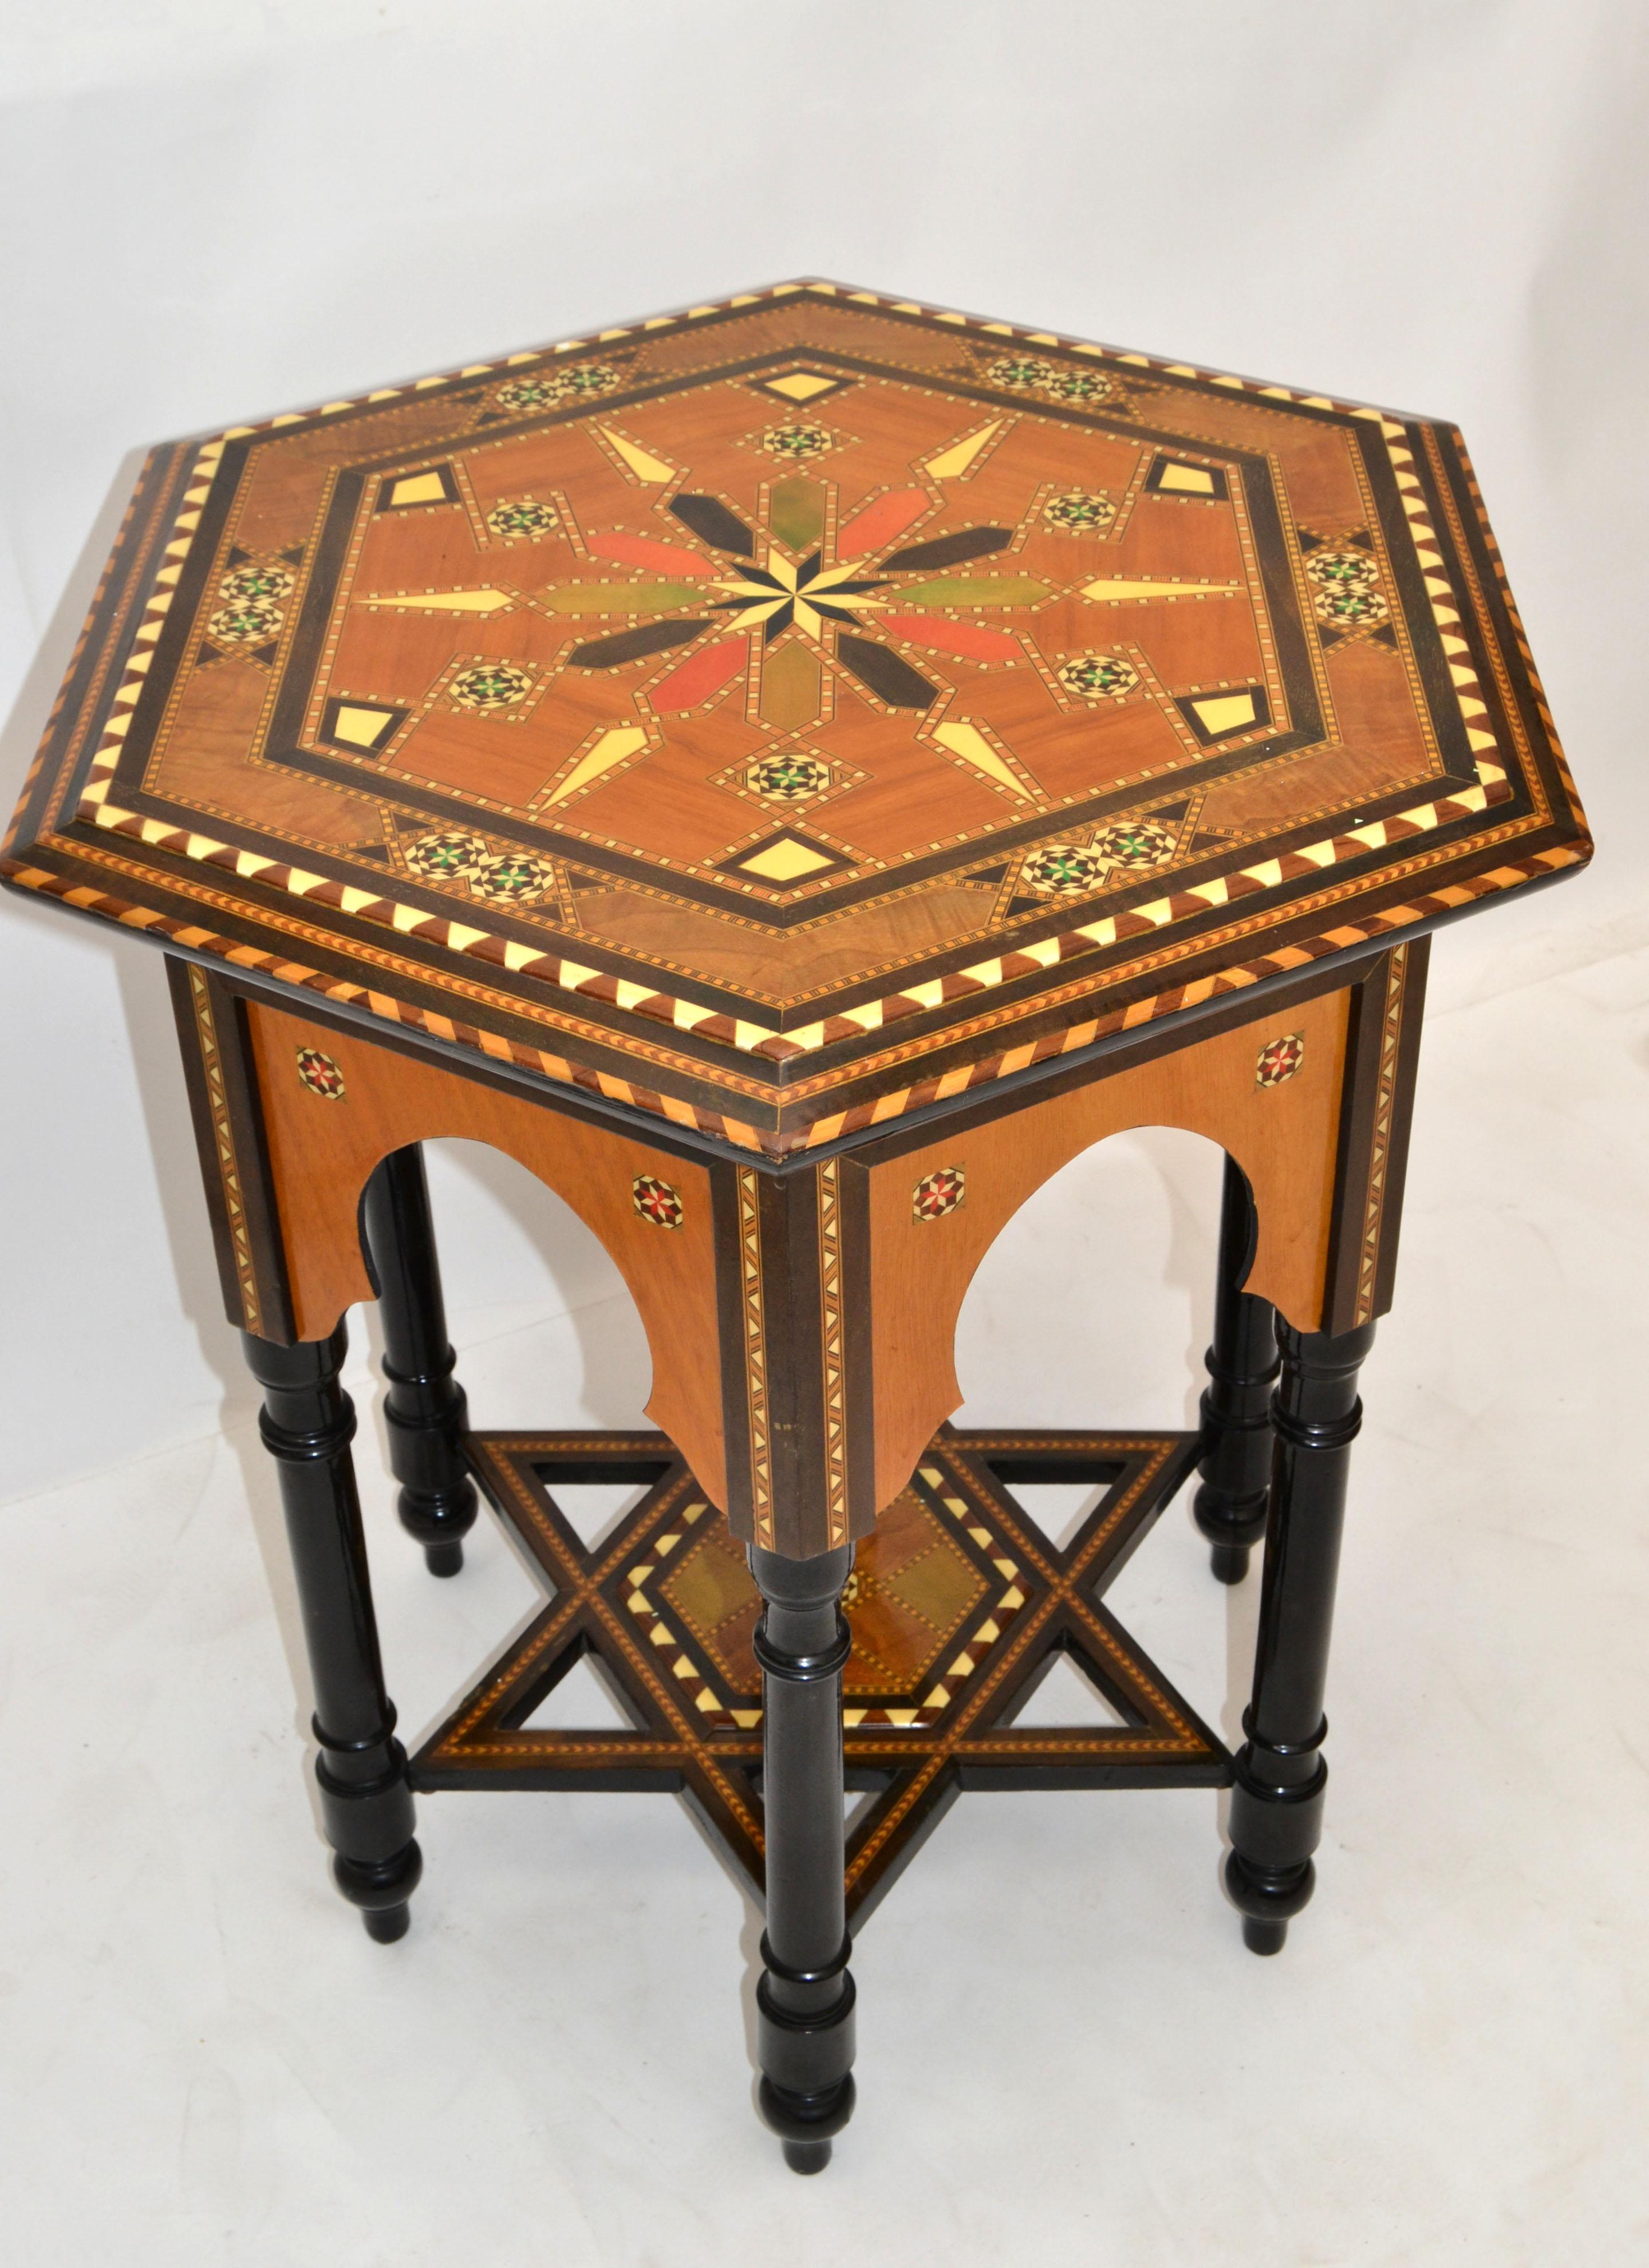 Hexagonal Wood Marquetry Moroccan Handmade Center Table Fruitwood Midcentury For Sale 1